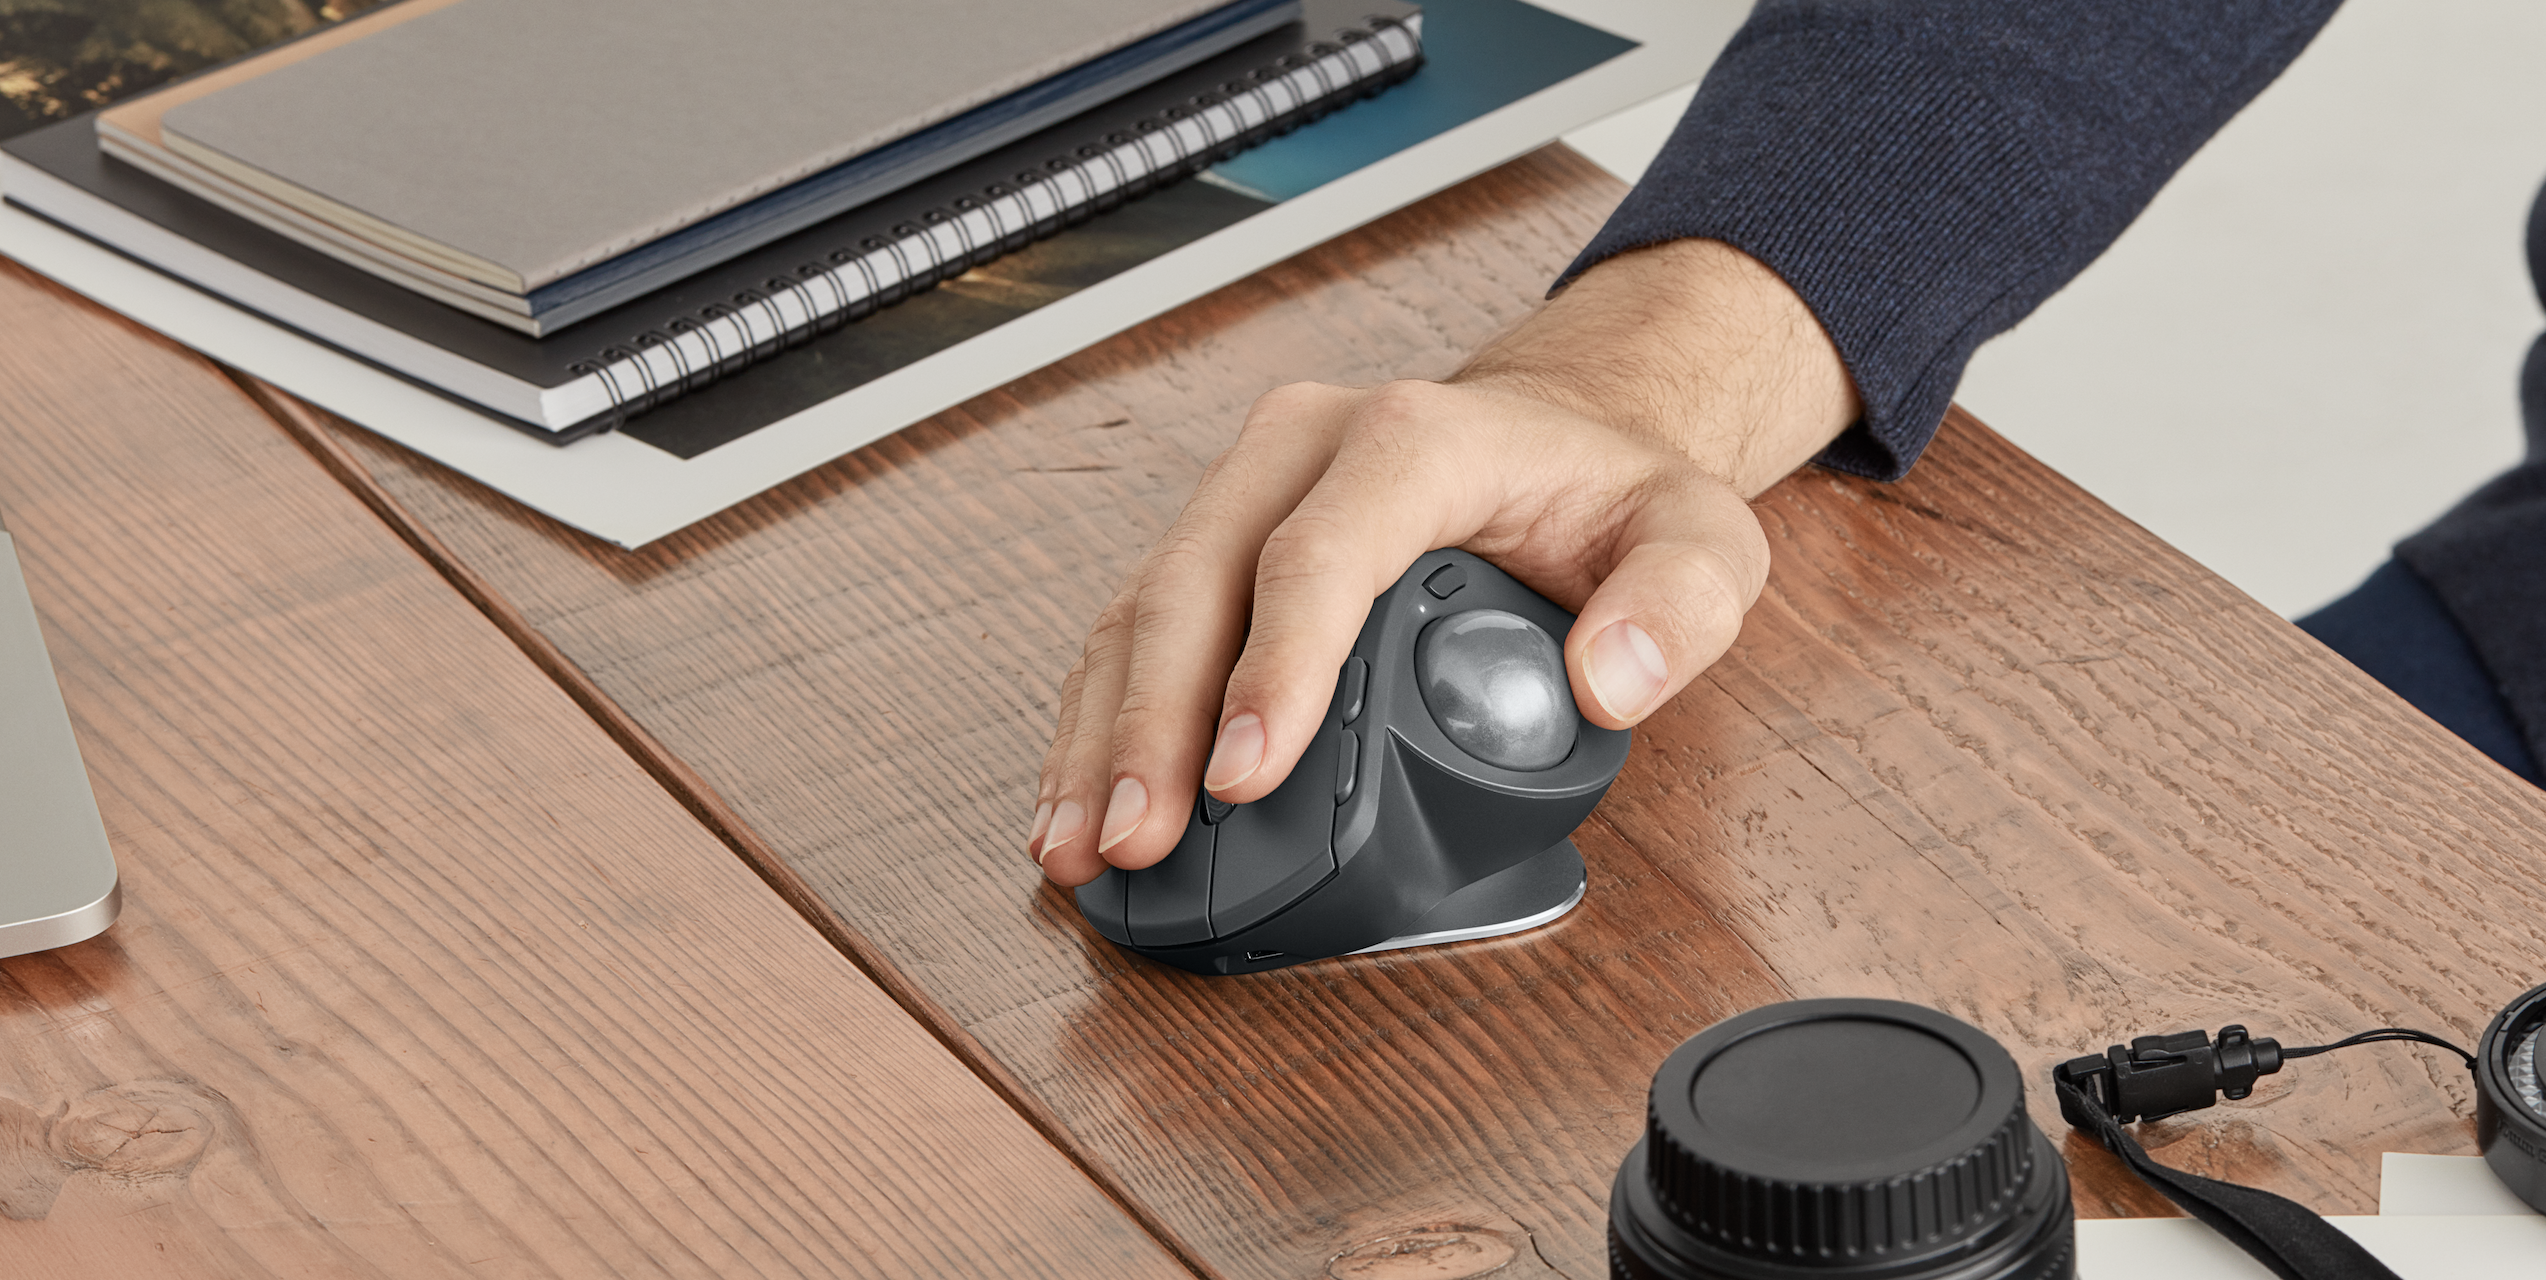 Logitech Trackball Mouse Launched